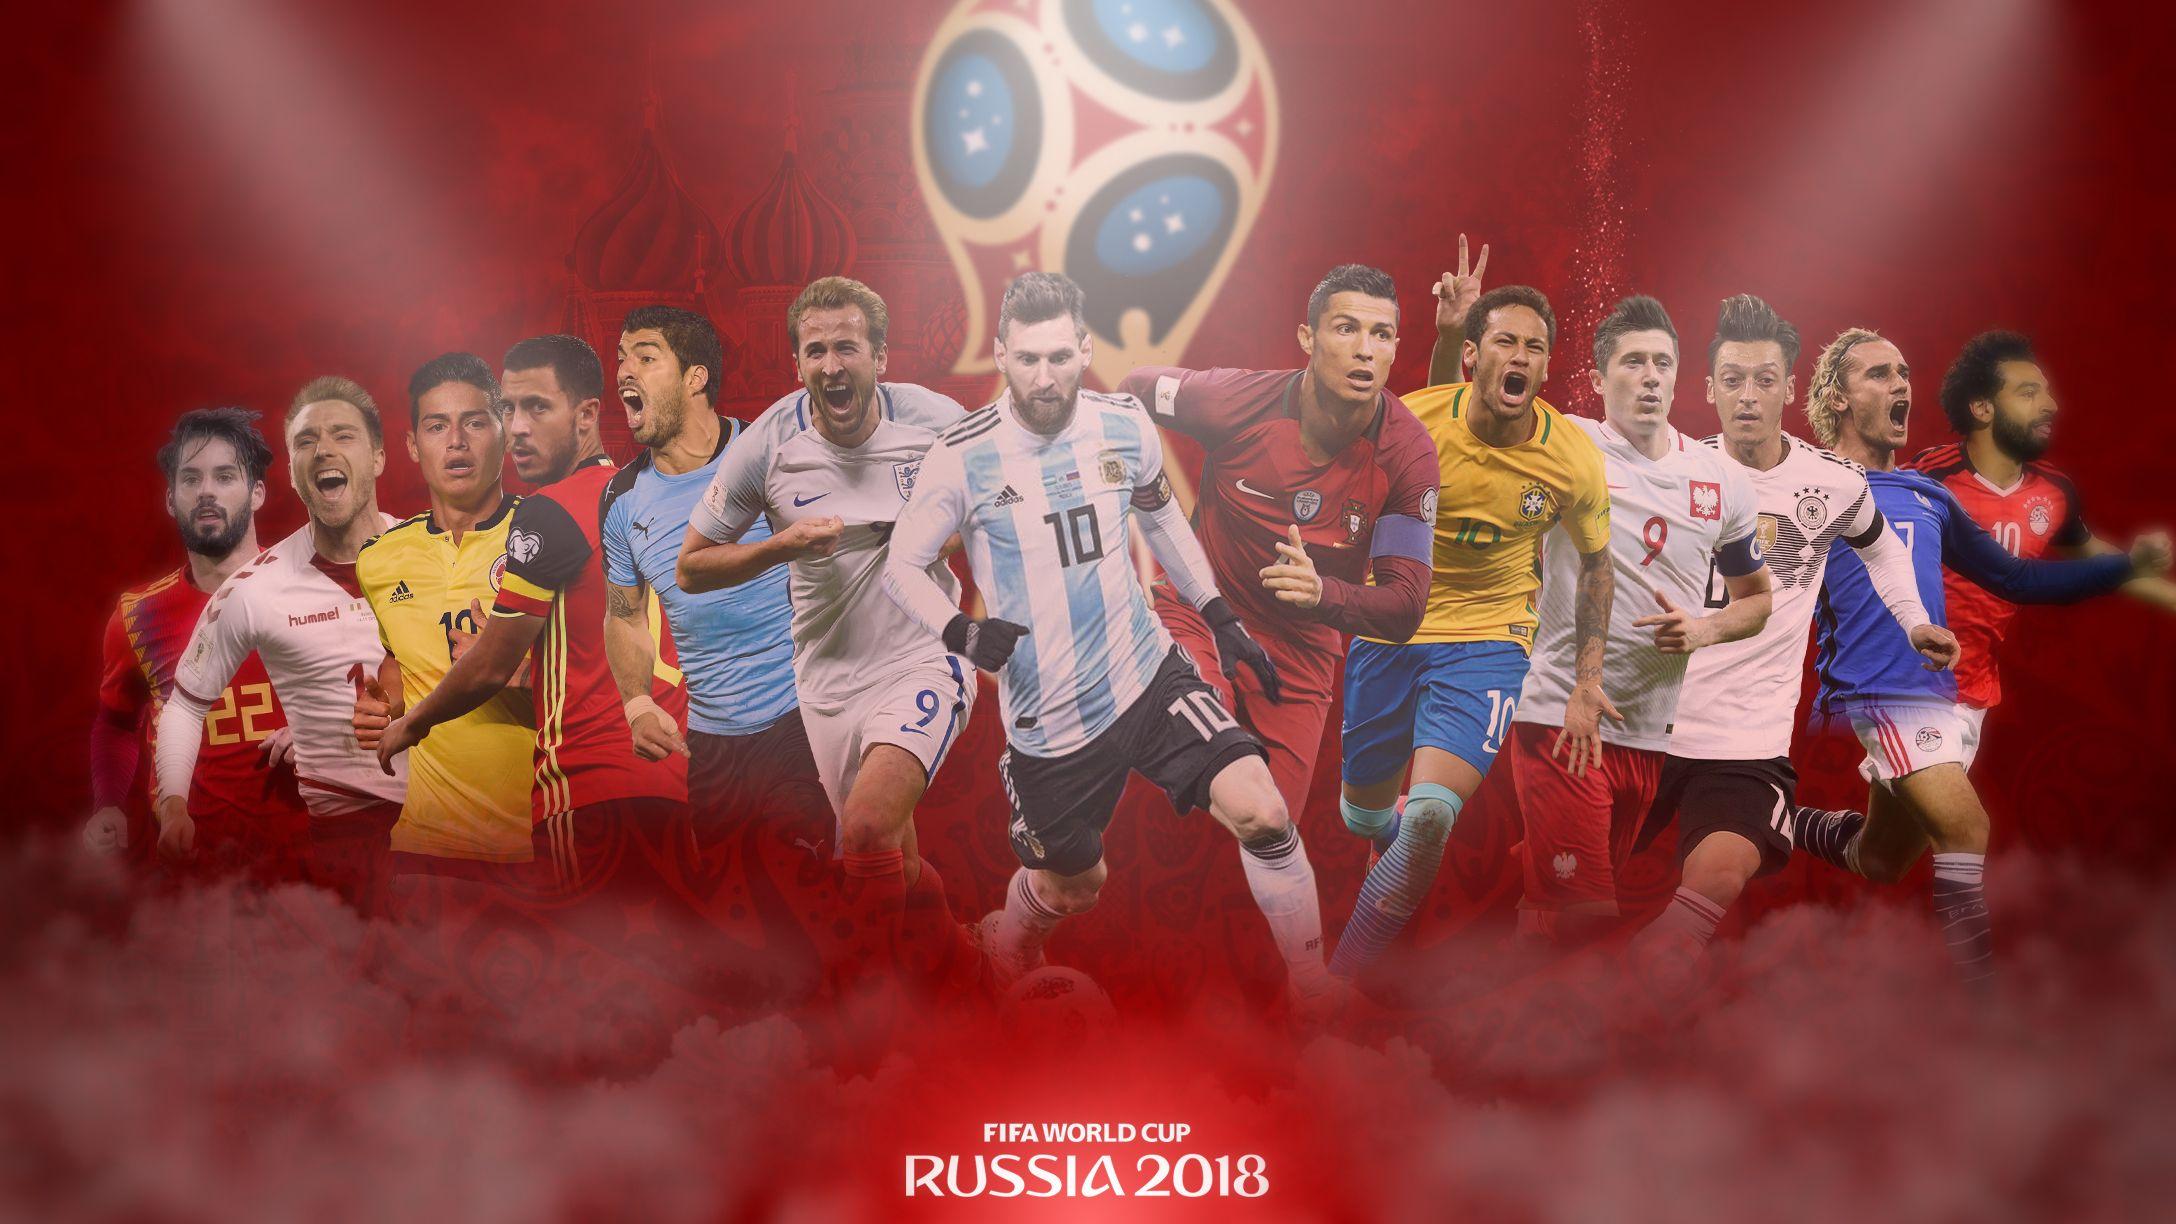 Download The Iconic FIFA World Cup Trophy Wallpaper  Wallpaperscom